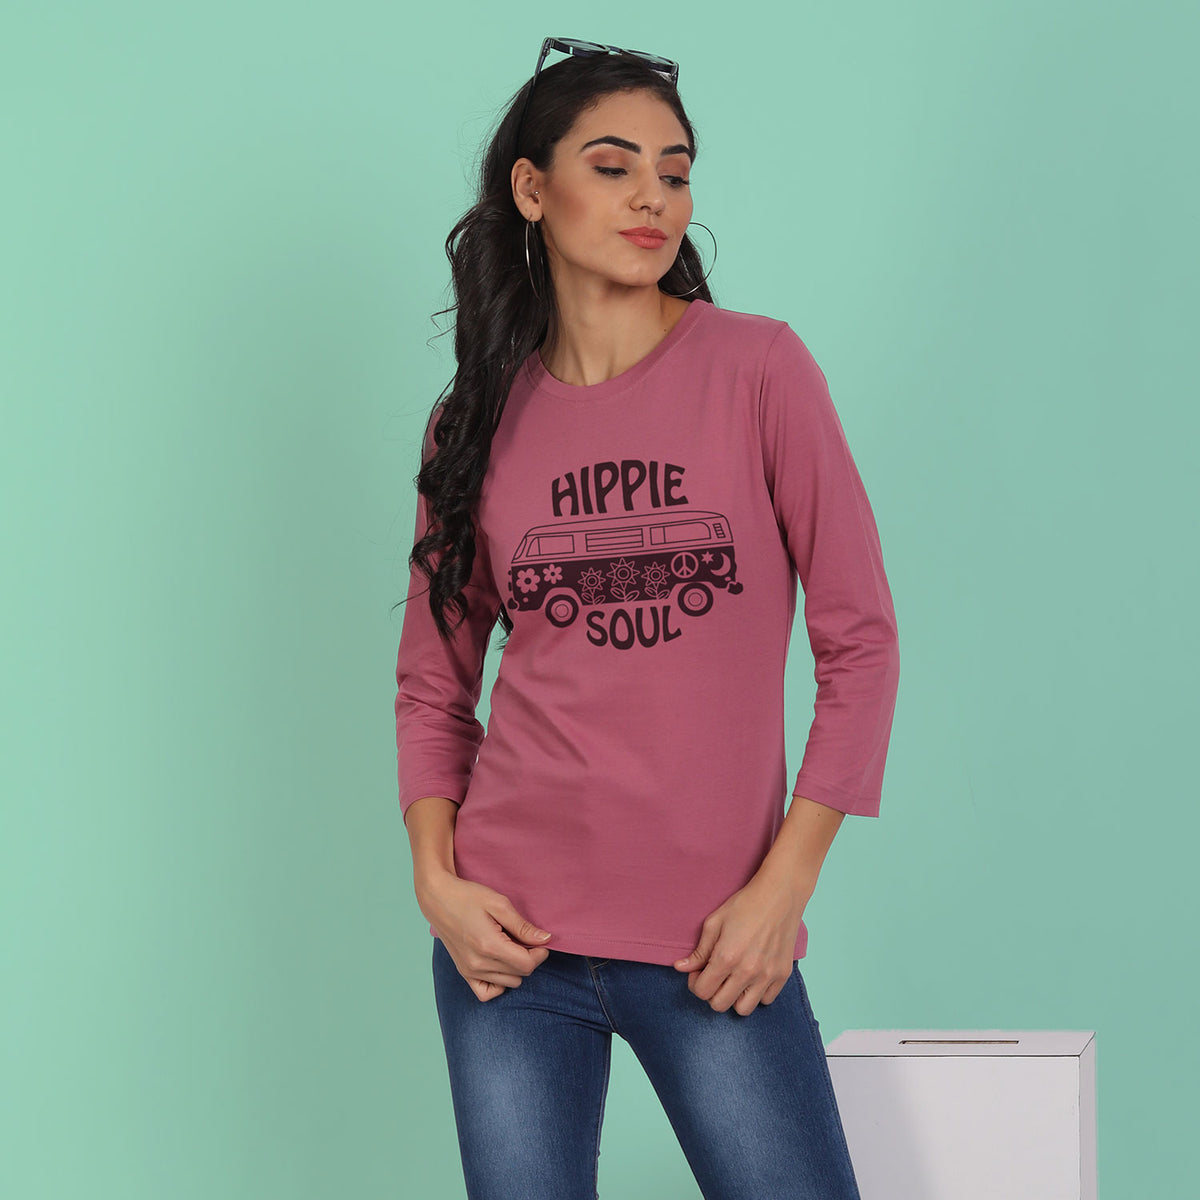 HippiE Soul Printed 3/4th Sleeve T-shirt For Girl